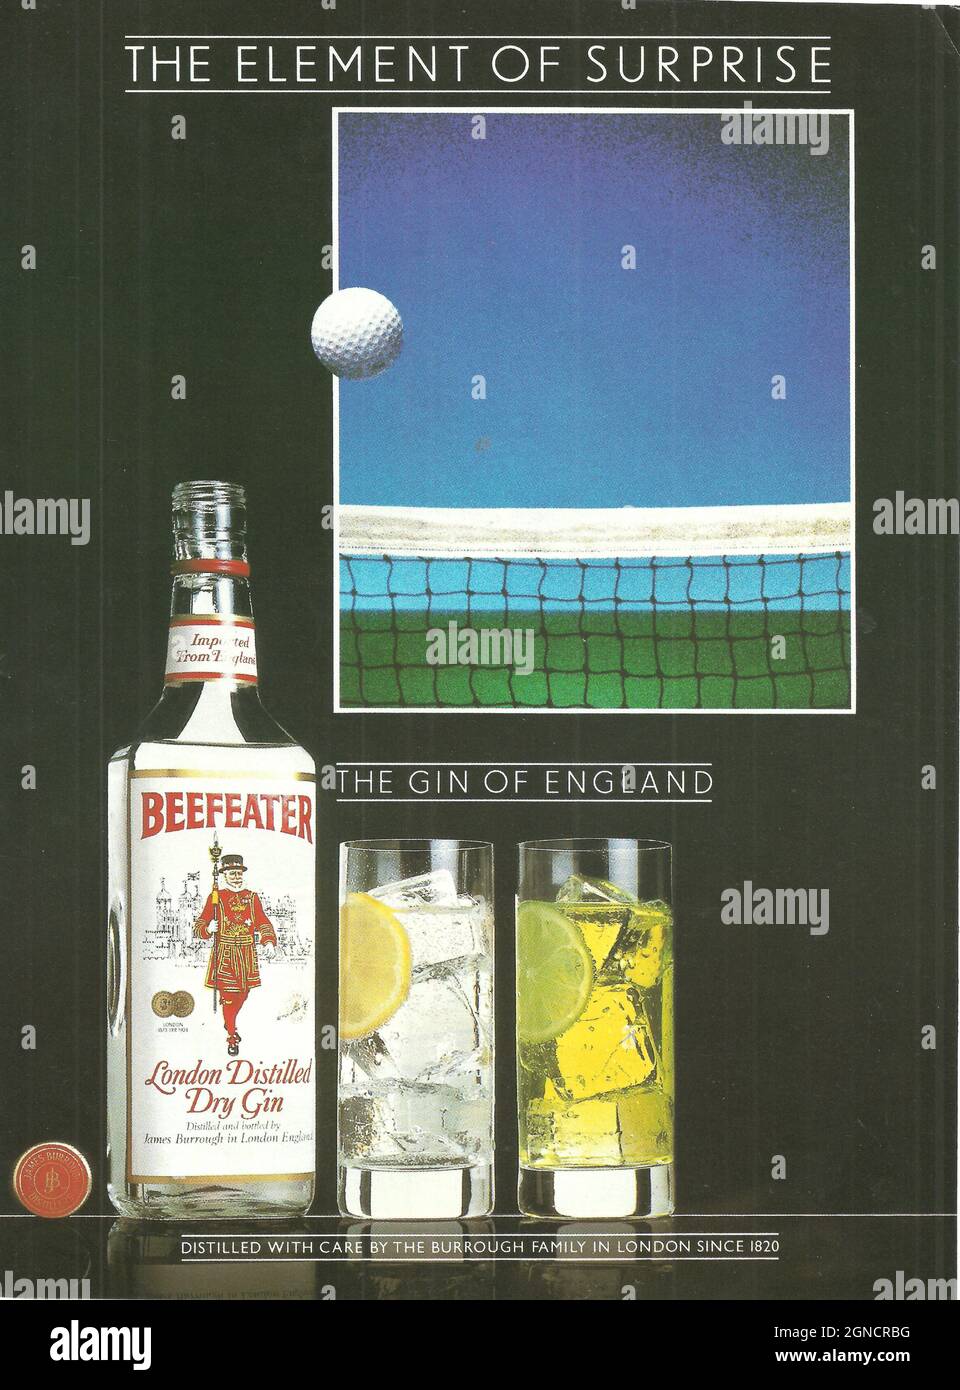 Beefeater gin London gin vintage advert advertisement ad 1970s 1980s Stock Photo